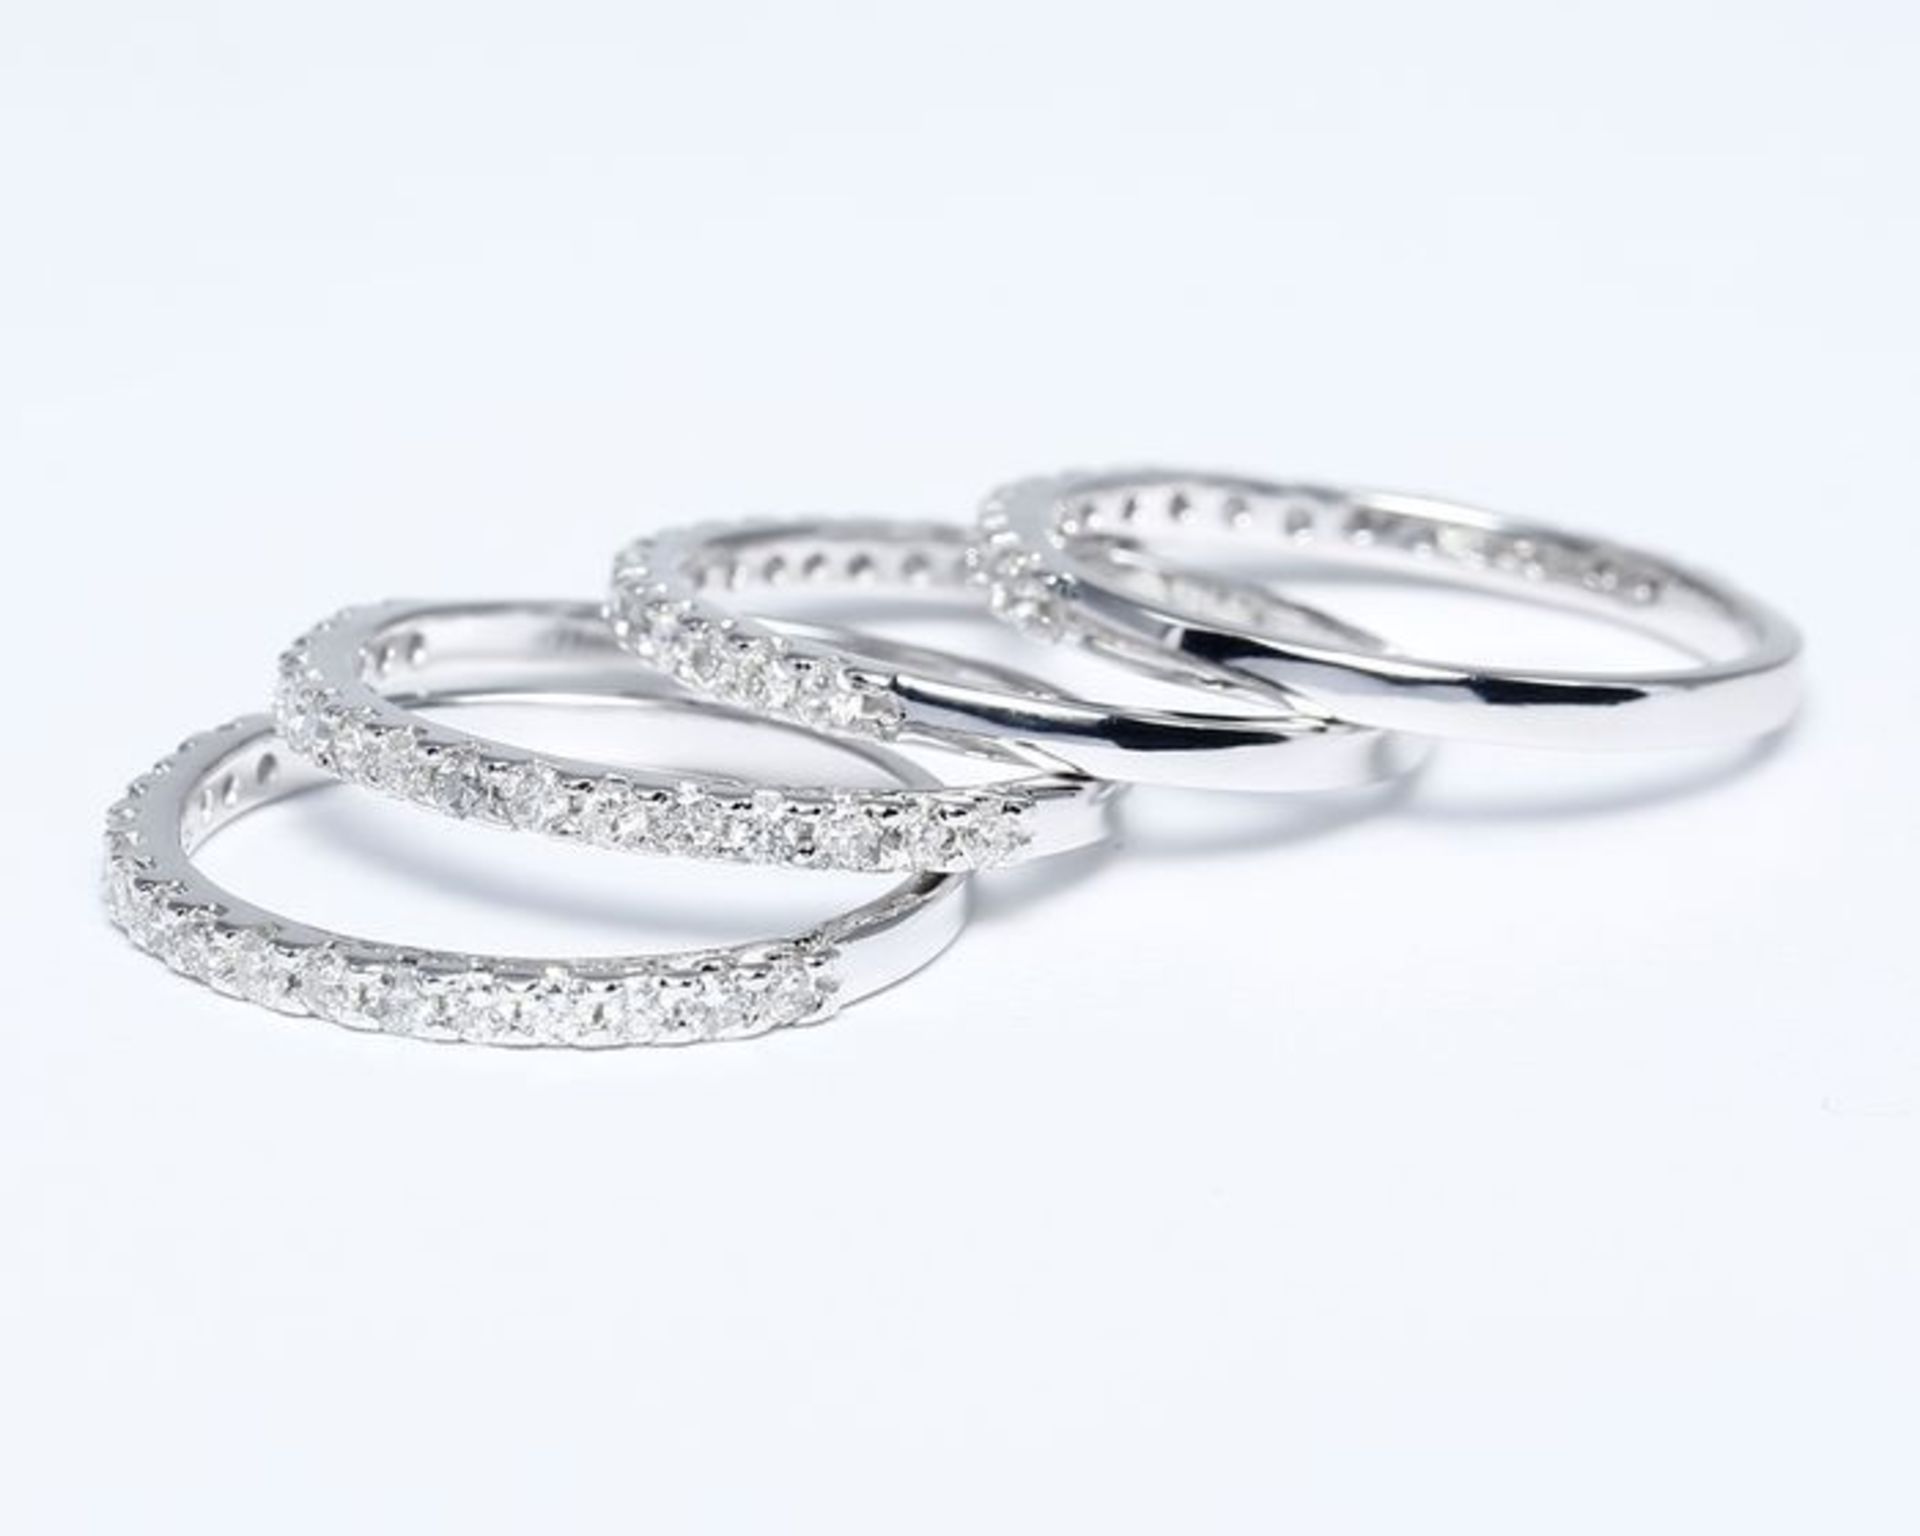 14 K White Gold Set of 4 Diamond Rings Made for each other - Image 3 of 3